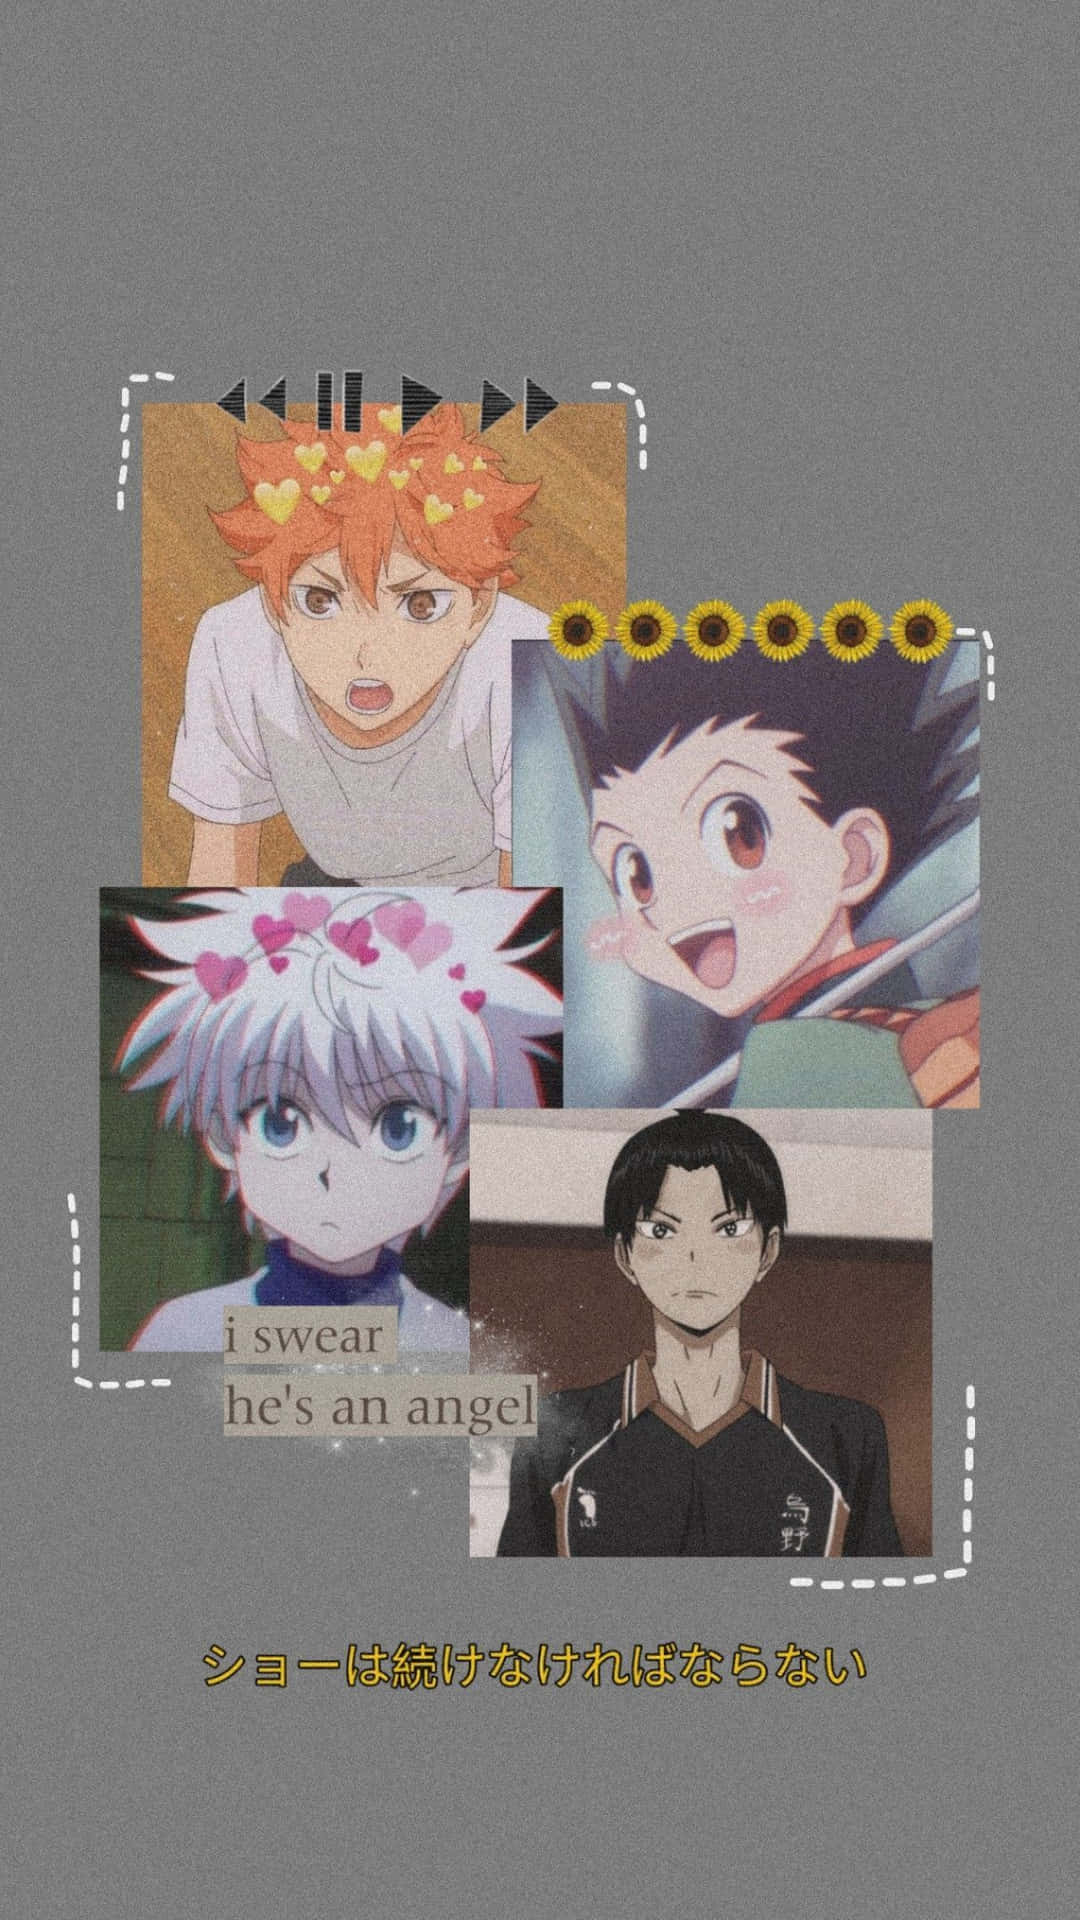 A dark and mysterious Hunter X Hunter Aesthetic Wallpaper